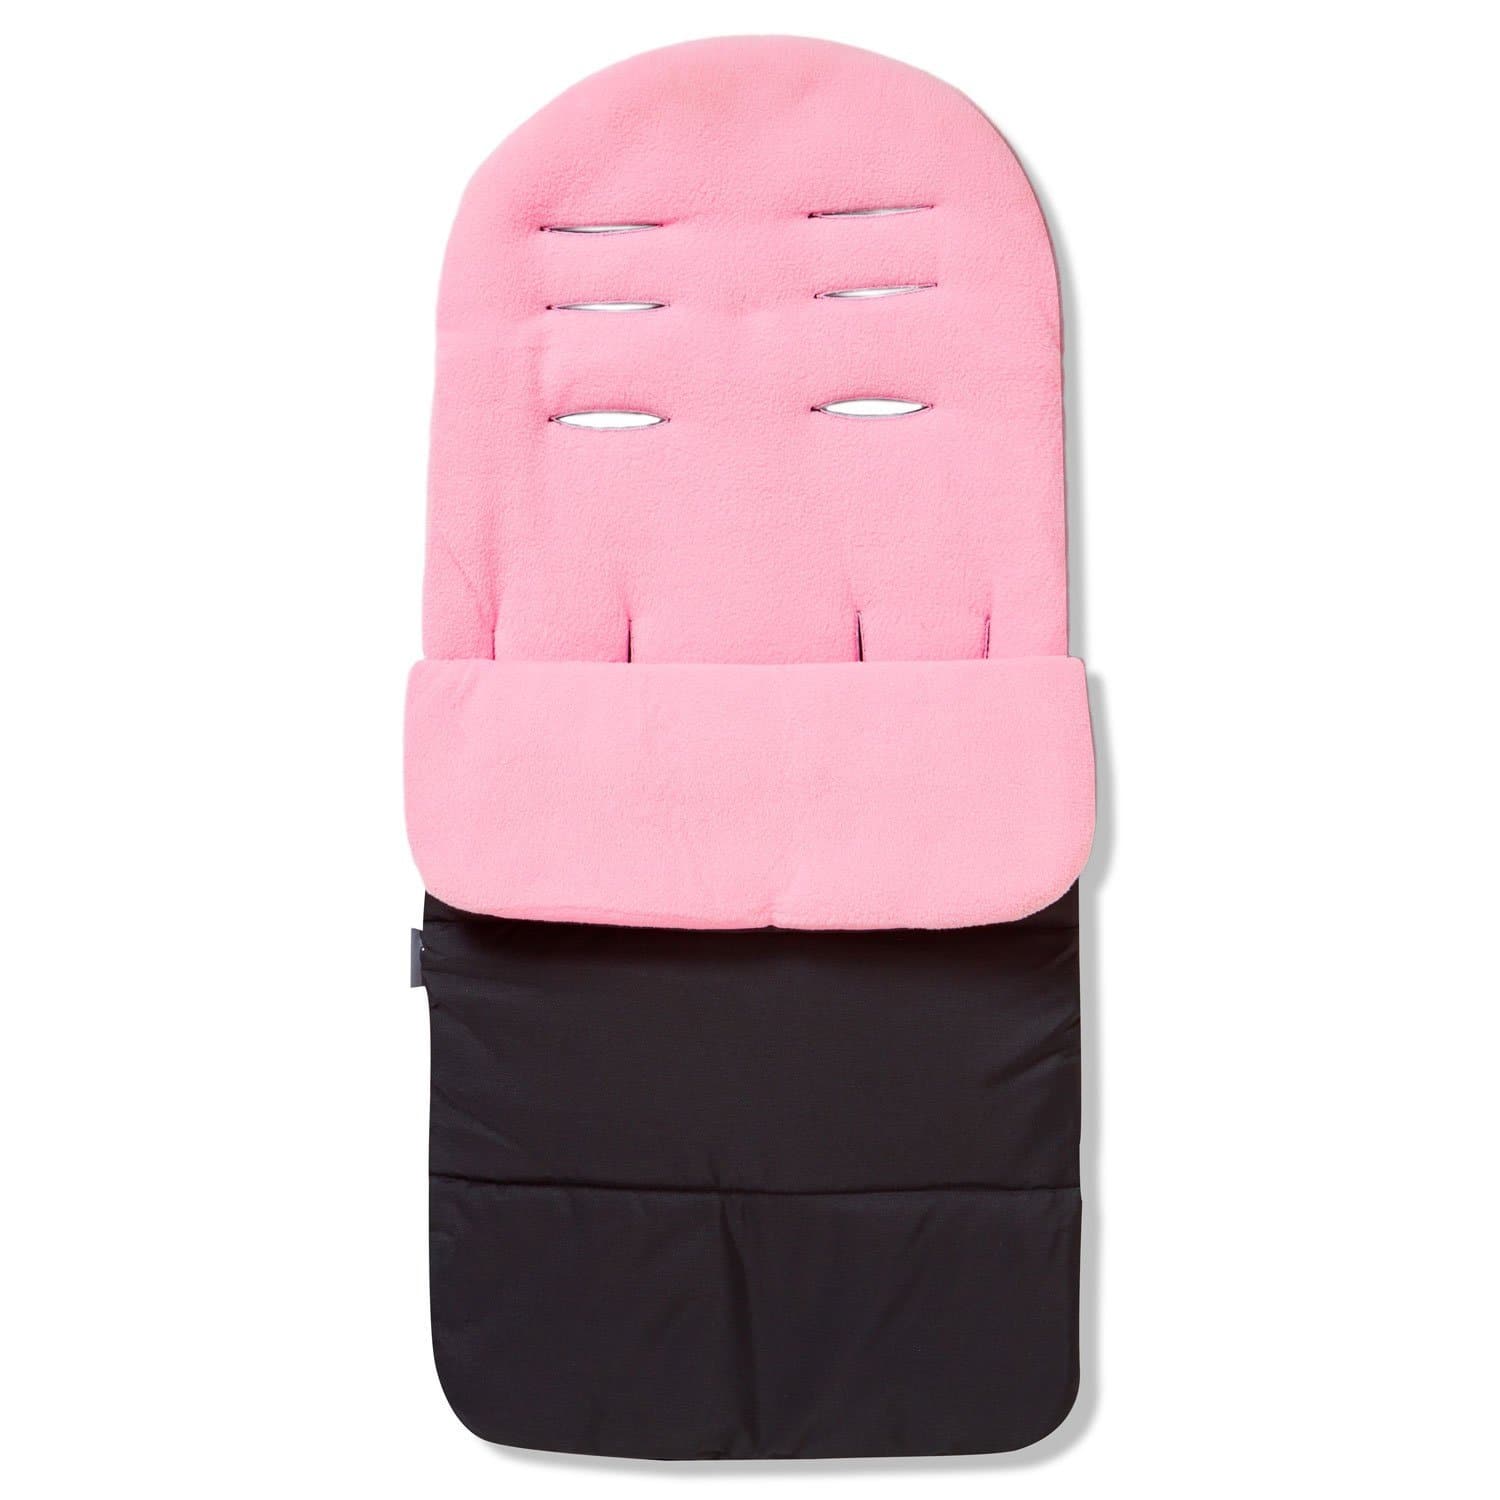 Premium Footmuff / Cosy Toes Compatible with Valco - Candy Pink / Fits All Models | For Your Little One